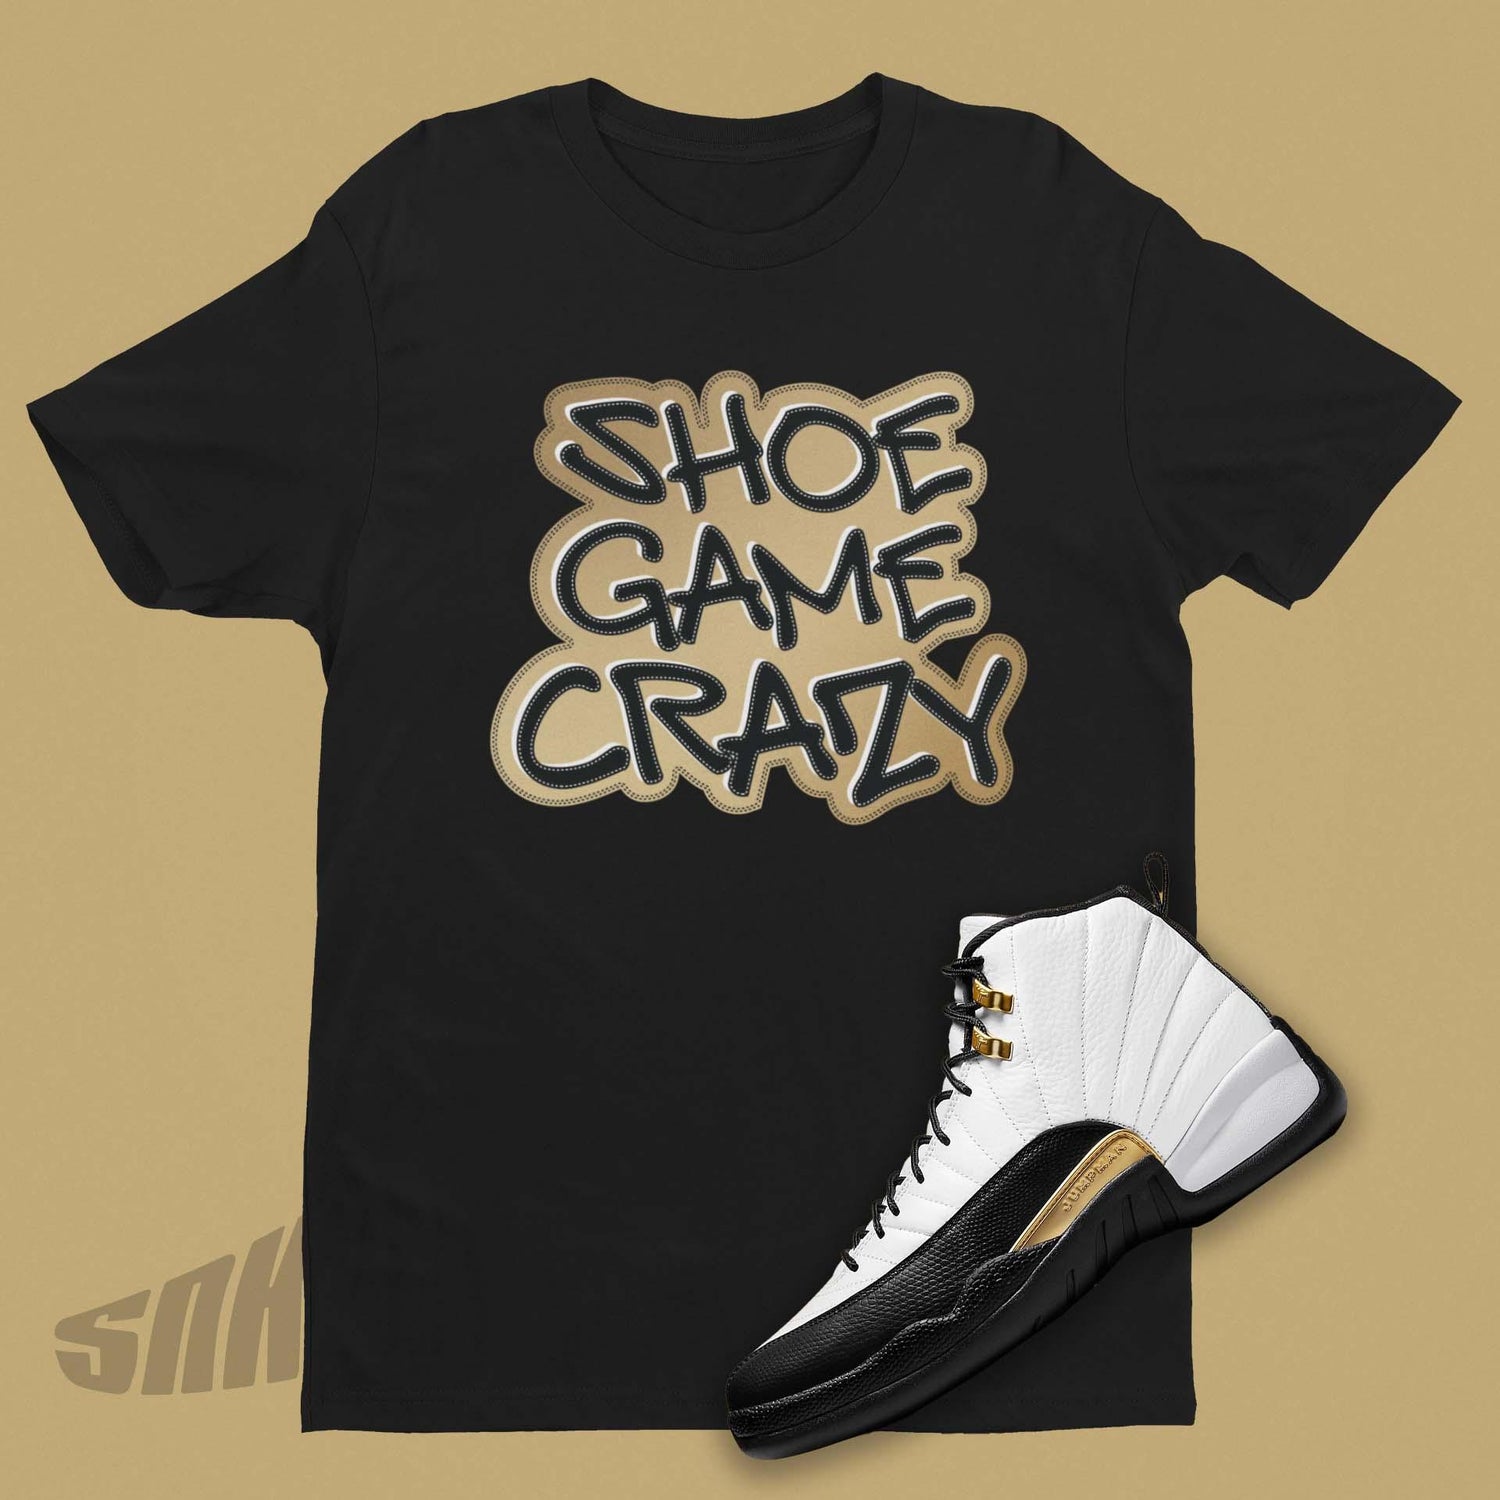 Shoe Game Crazy in Gold with Black Shirt